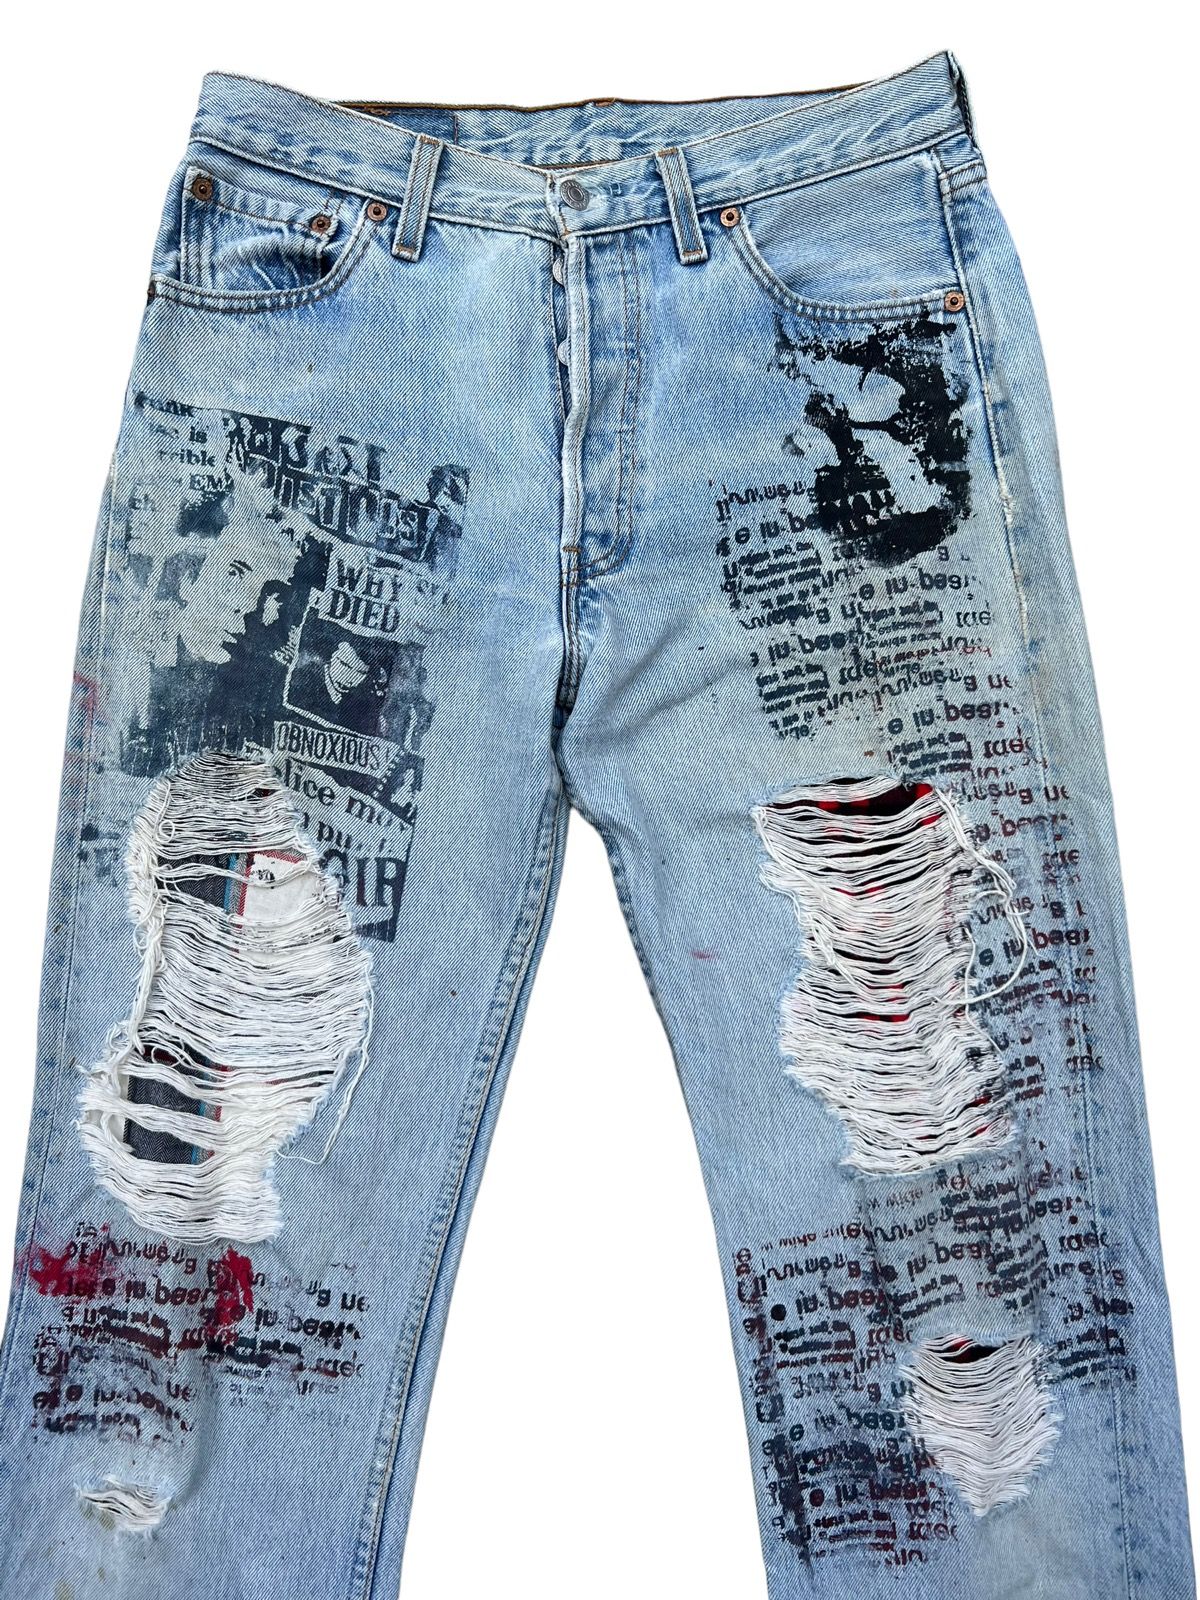 Rare🔥Vintage 90s Levis 501 Patchwork Distressed Ripped Jeans - 4